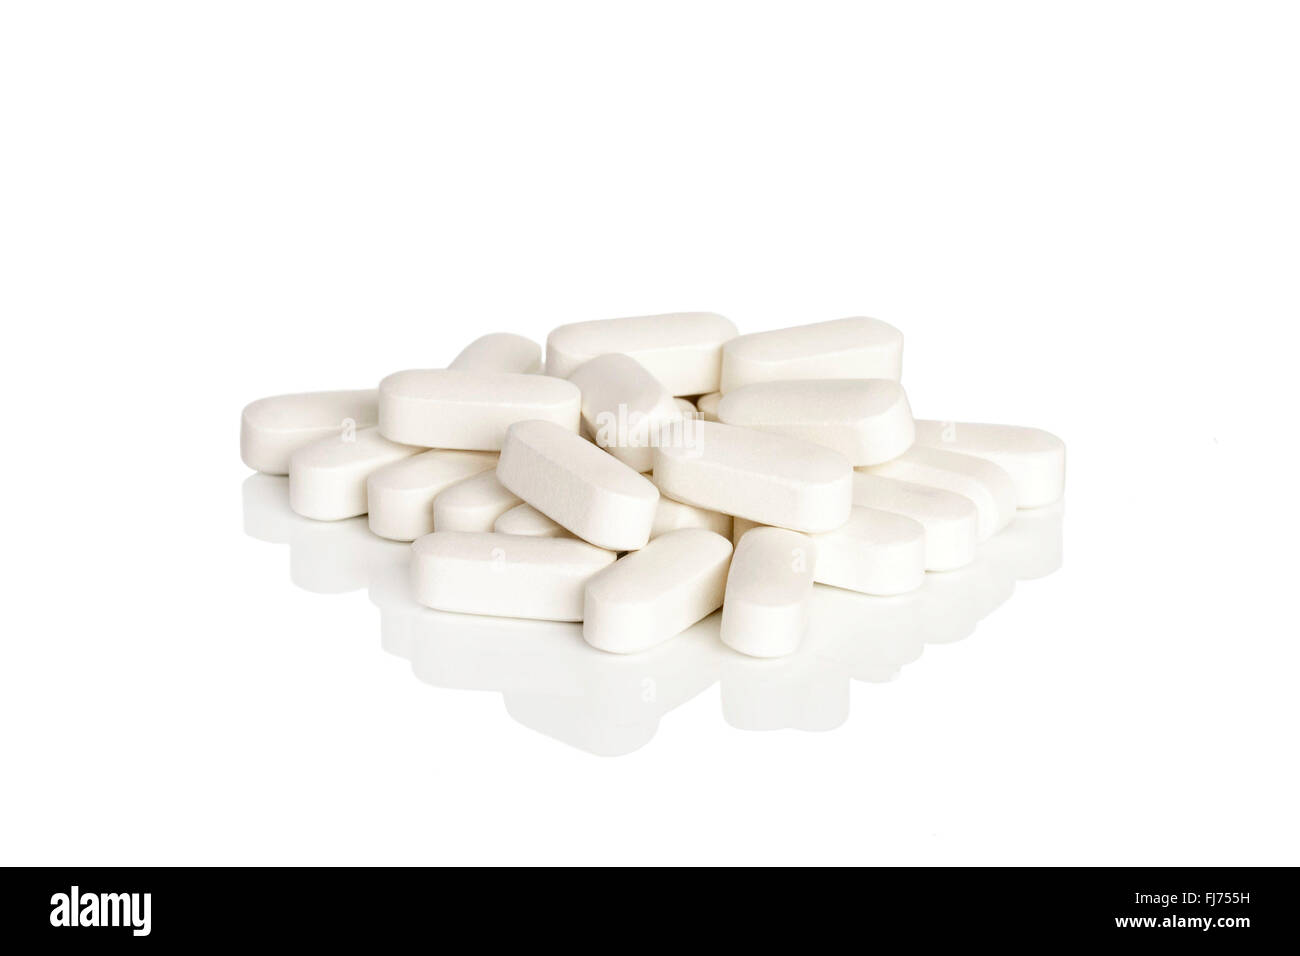 A pile of calcium vitamin supplement tablets isolated on a white background. Stock Photo